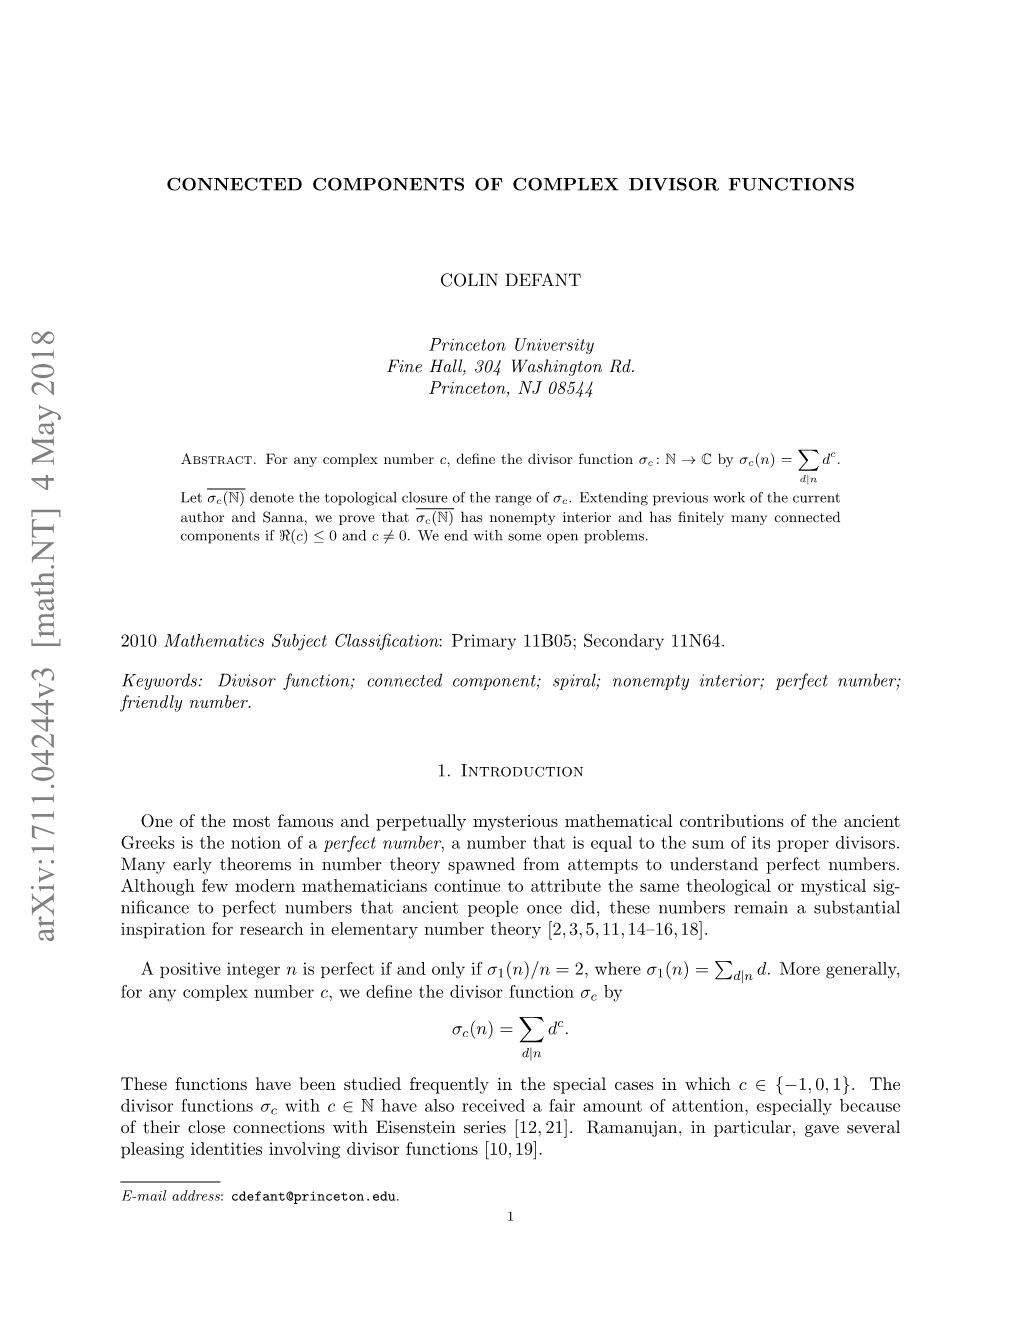 Connected Components of Complex Divisor Functions